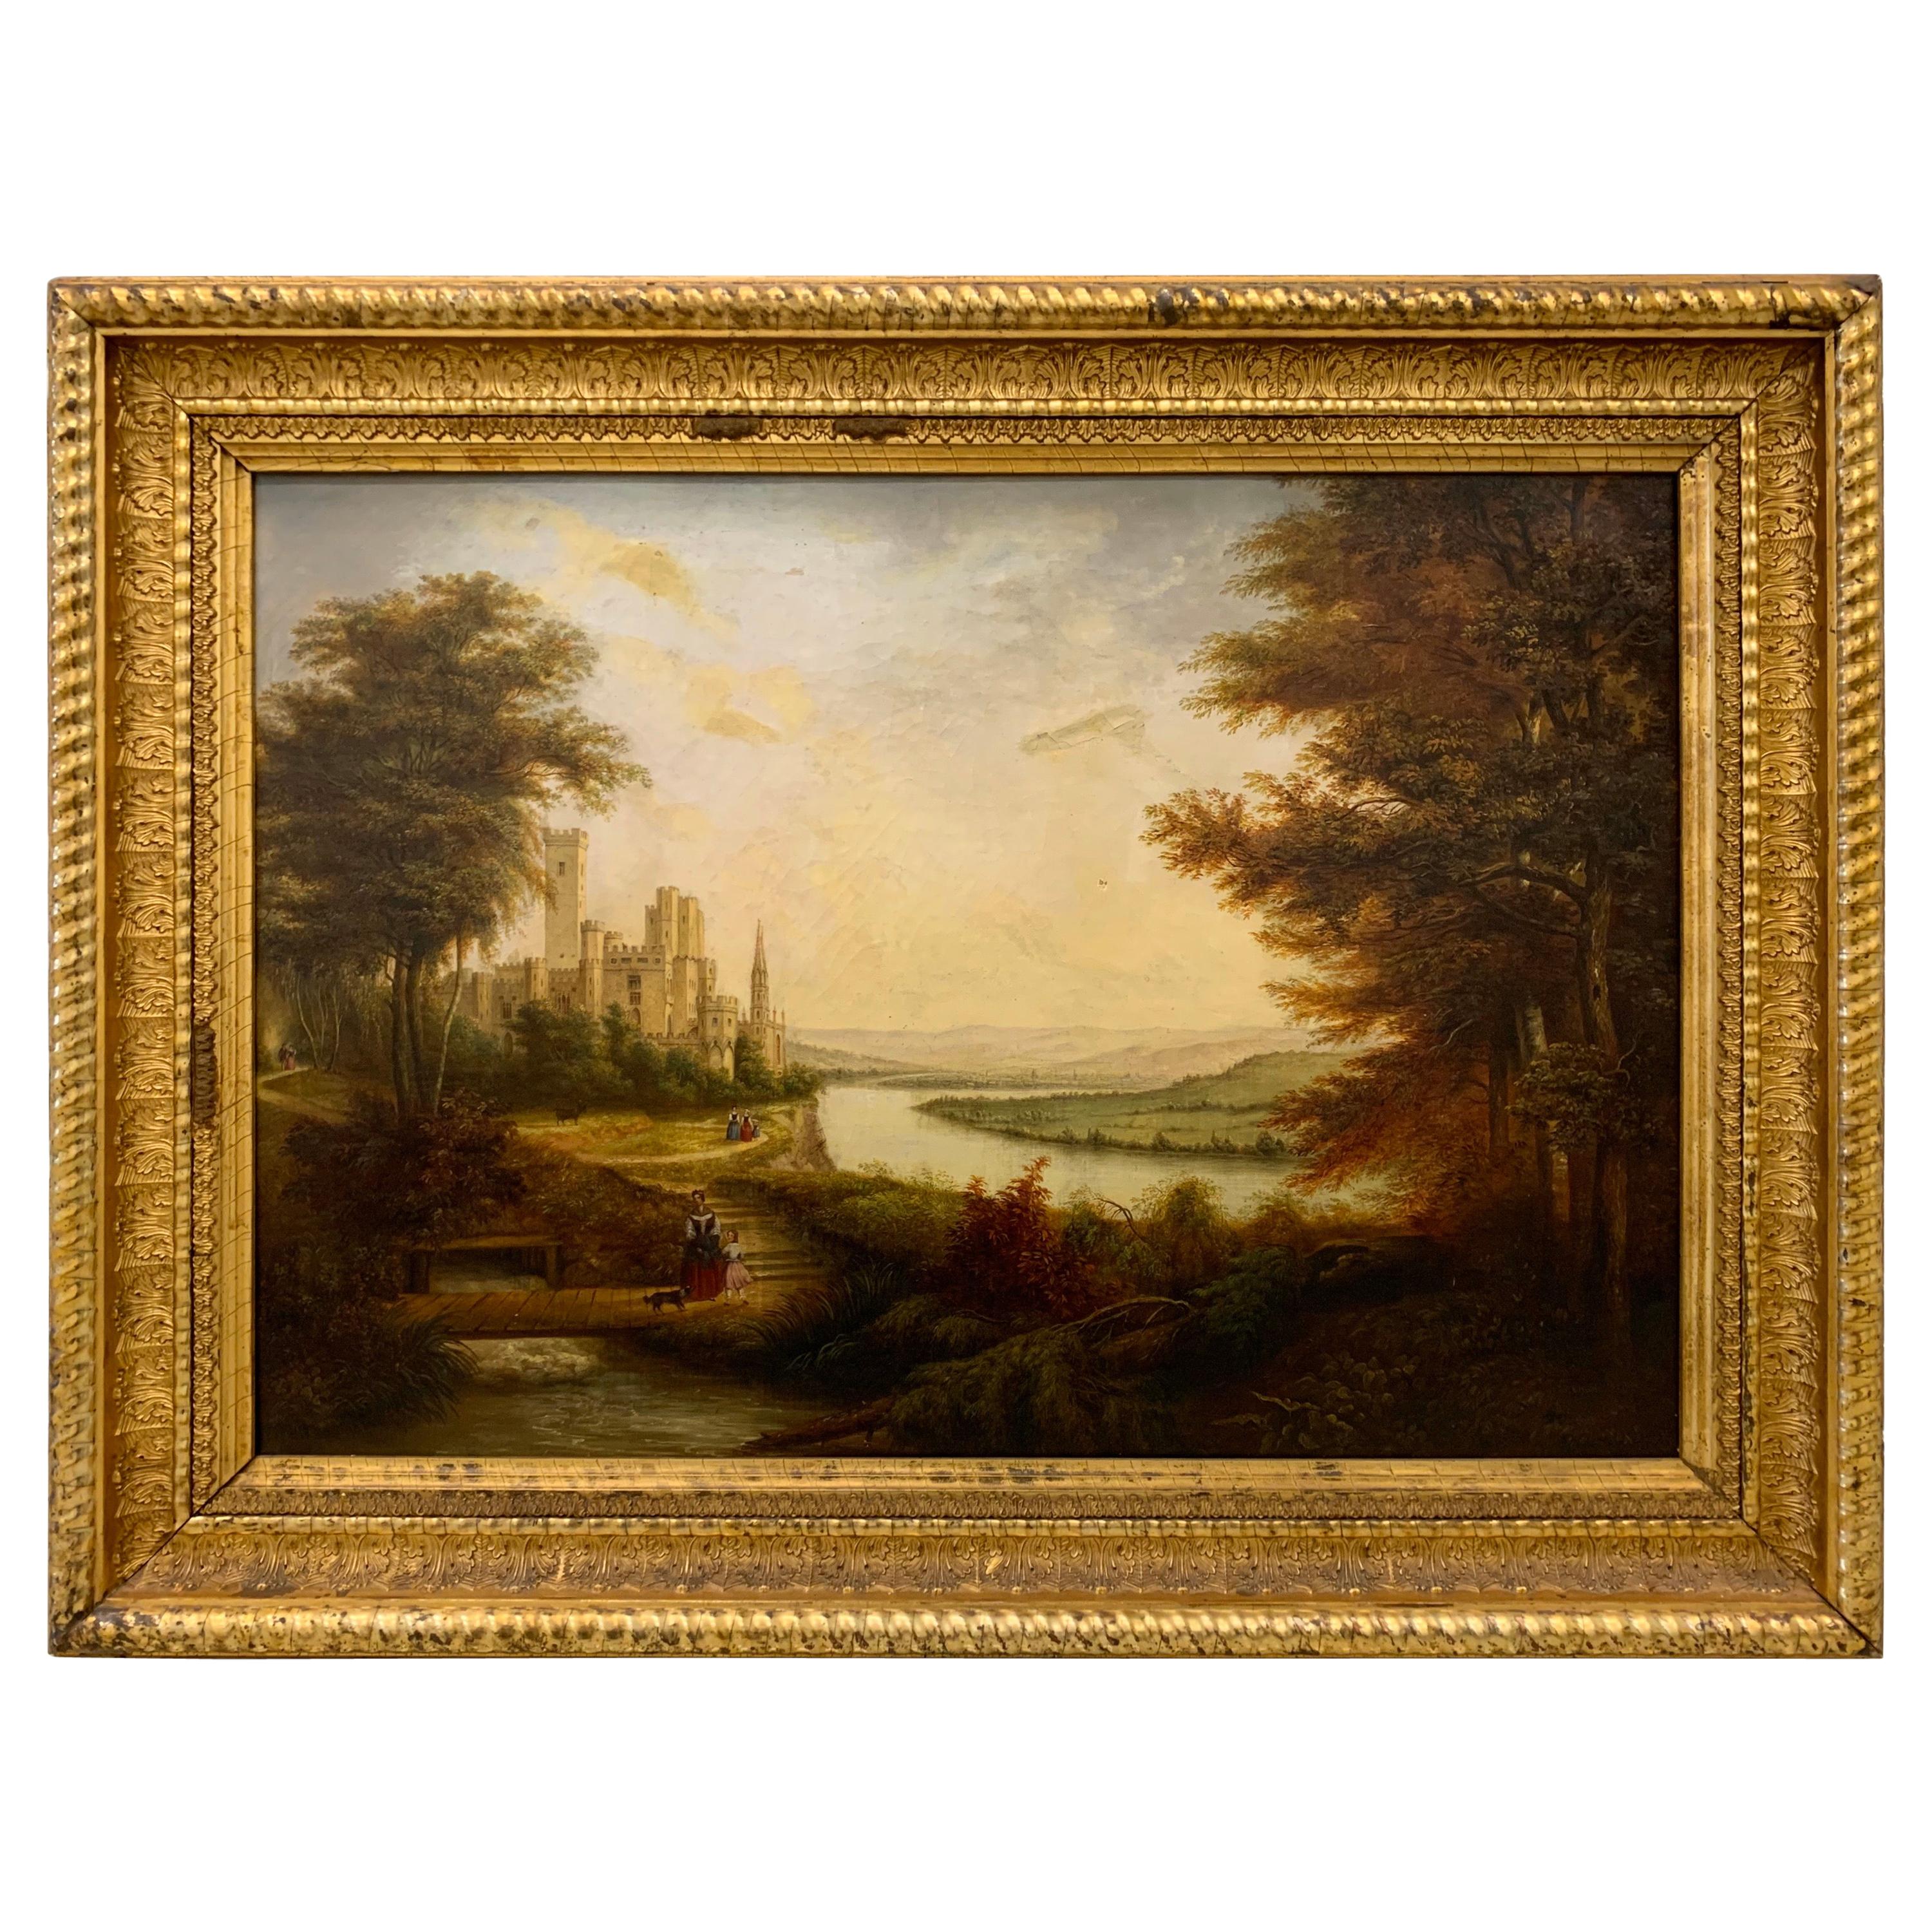 Antique Original Oil on Canvas Painting French Countryside, 19th Century